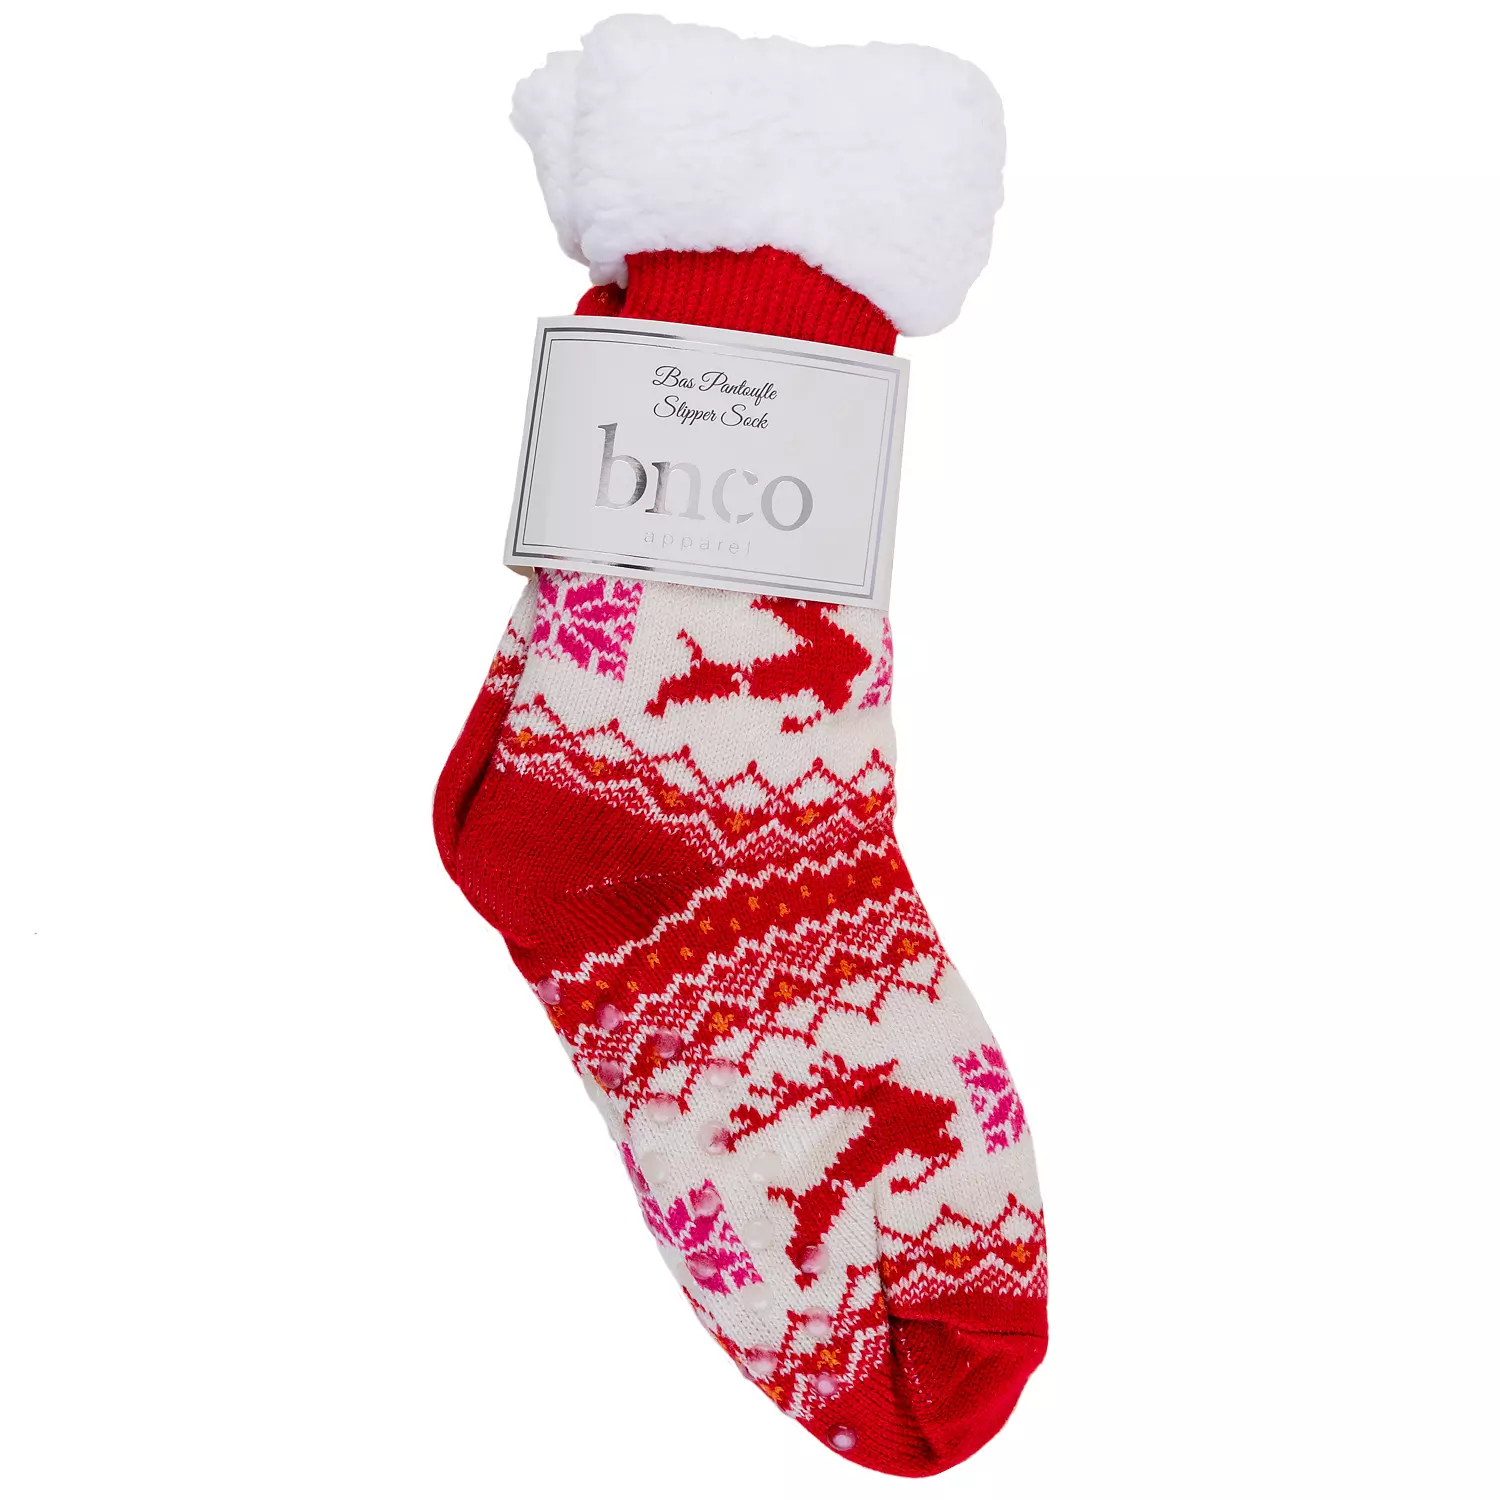 Cozy reindeer slipper socks with sherpa lining, red